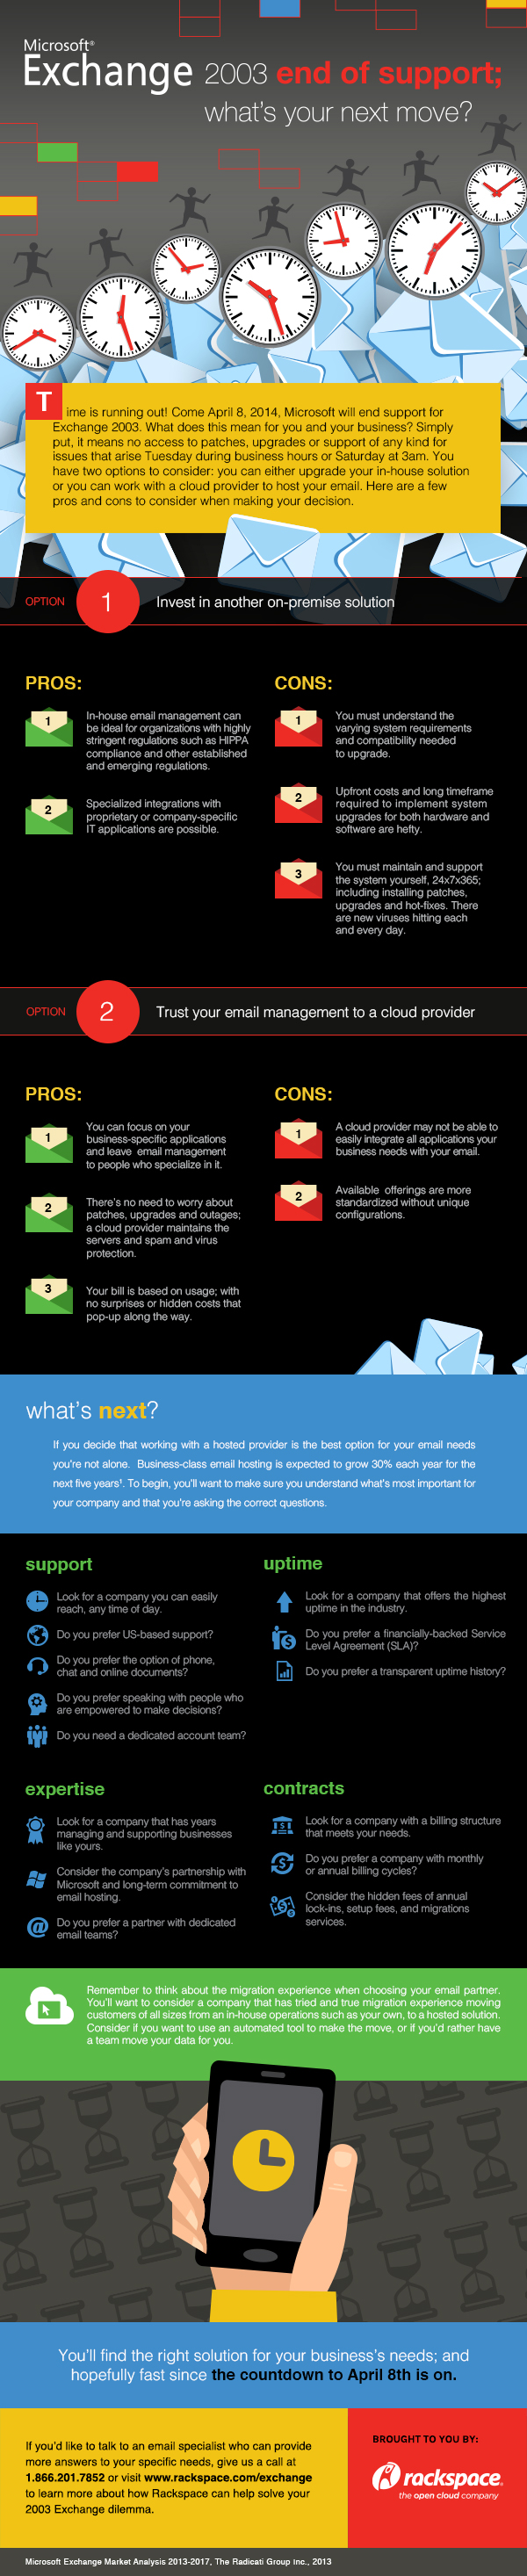 Rackspace® — Support Is Ending For Microsoft Exchange 2003. Are You Ready? [Infographic]